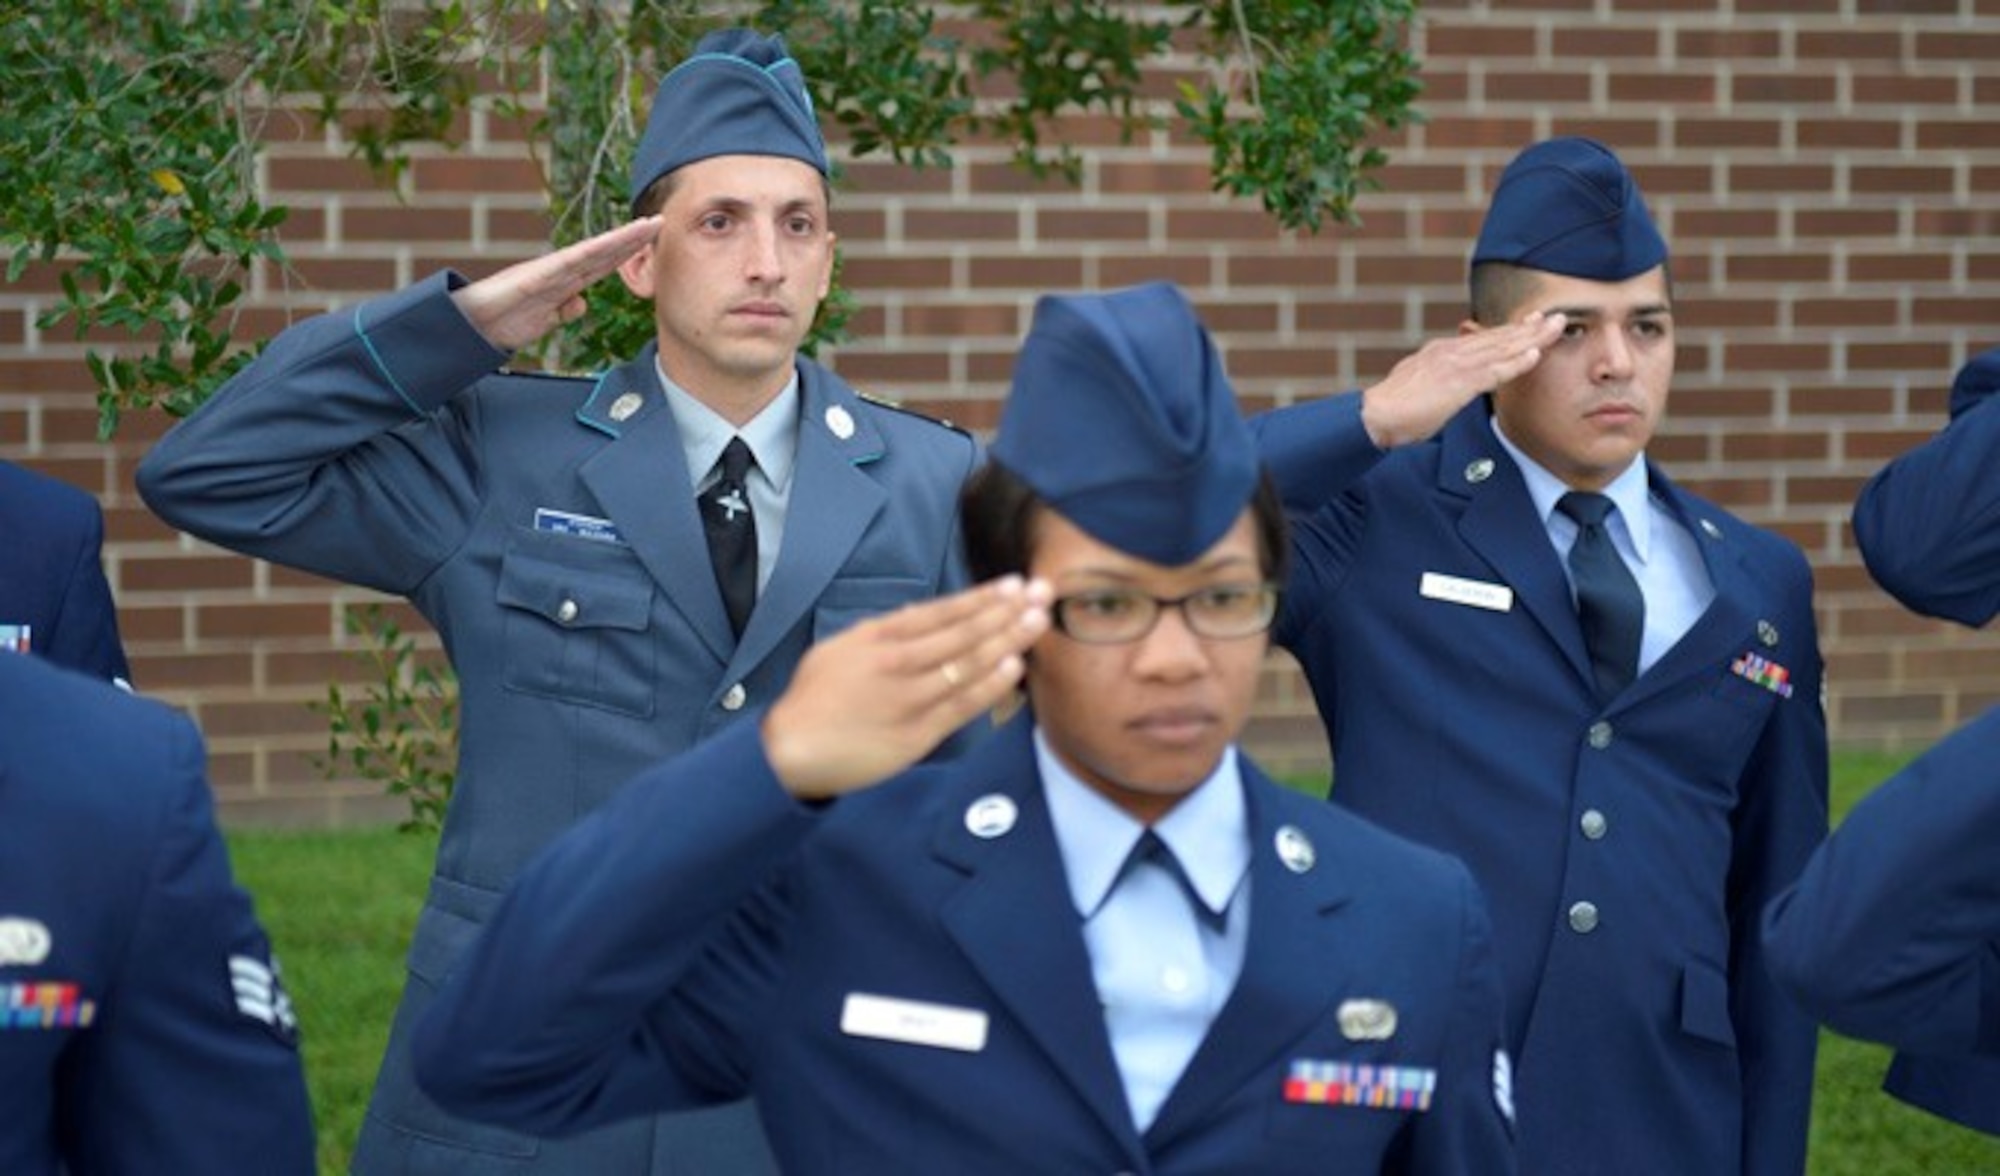 Corporal Stoyko V. Stoykov, an Airman with the Bulgarian air force, salutes with U.S. Air Force members and classmates August 15, 2013, during a reveille ceremony at McGhee Tyson Air National Guard Base, Tenn. Stoykov graduated from Airman Leadership School along with Bulgarian Sergeant Yordanka S. Petrova-Angelova, who graduated from the NCO Academy, as a result of international relations built through the Tennessee National Guard State Partnership Program.